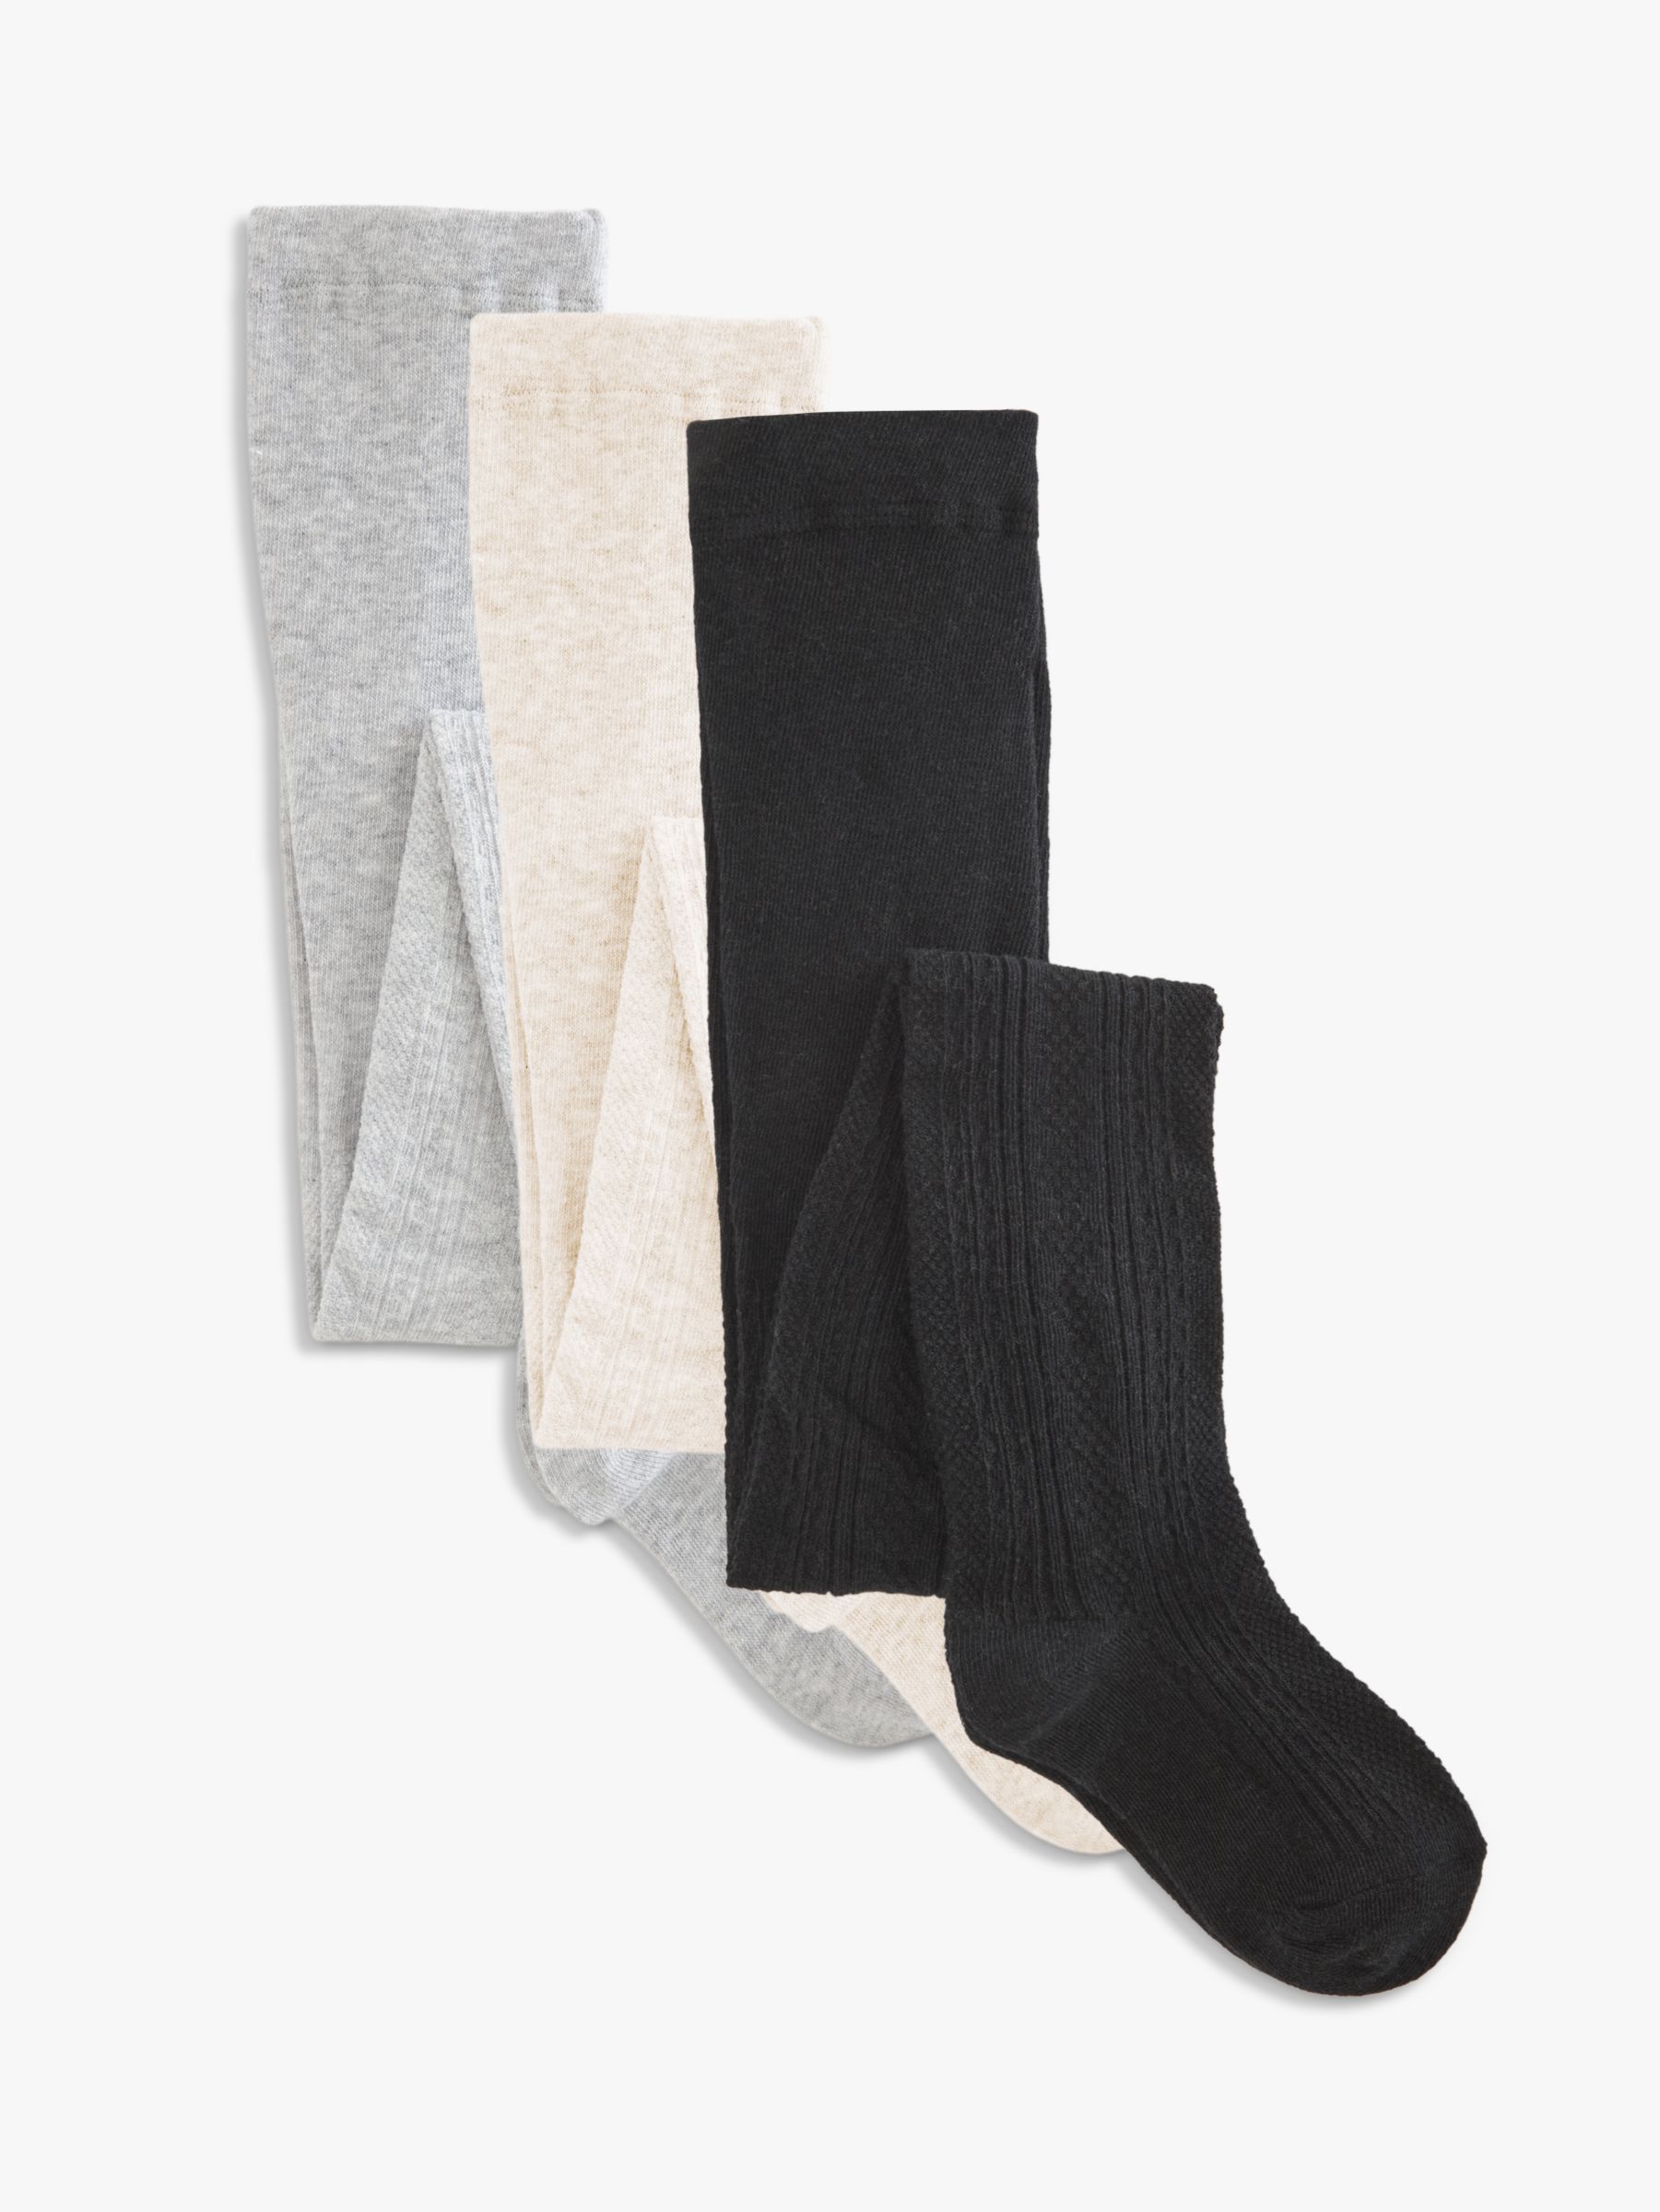 John Lewis Kids' Cable Knit Tights, Pack of 3, Black/Grey/Neutral at ...